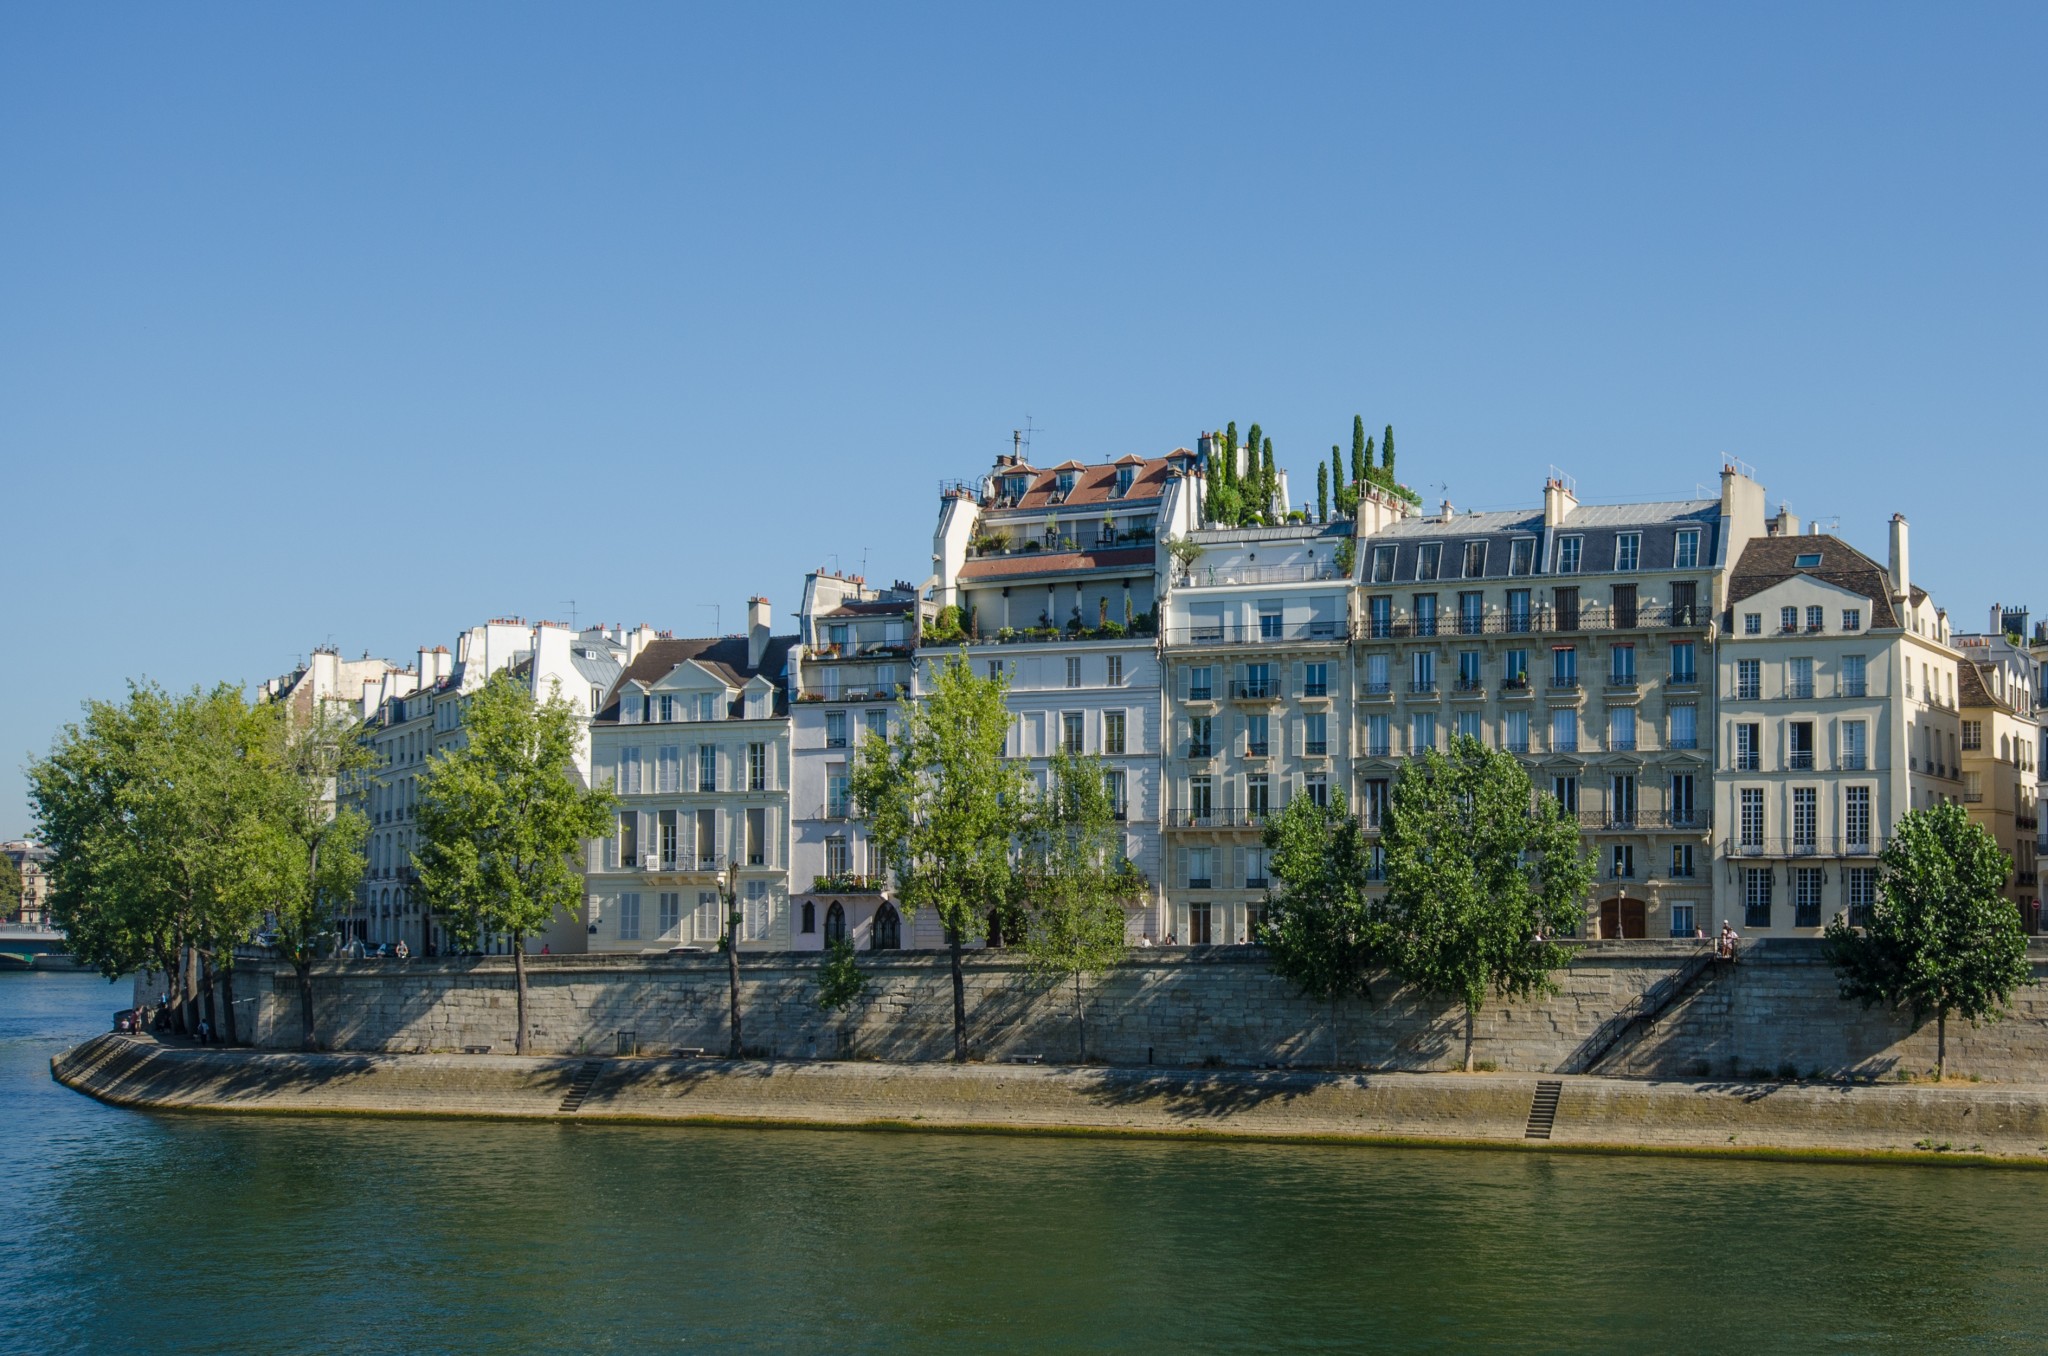 €325,000 mortgage loan to finance a primary home in Paris